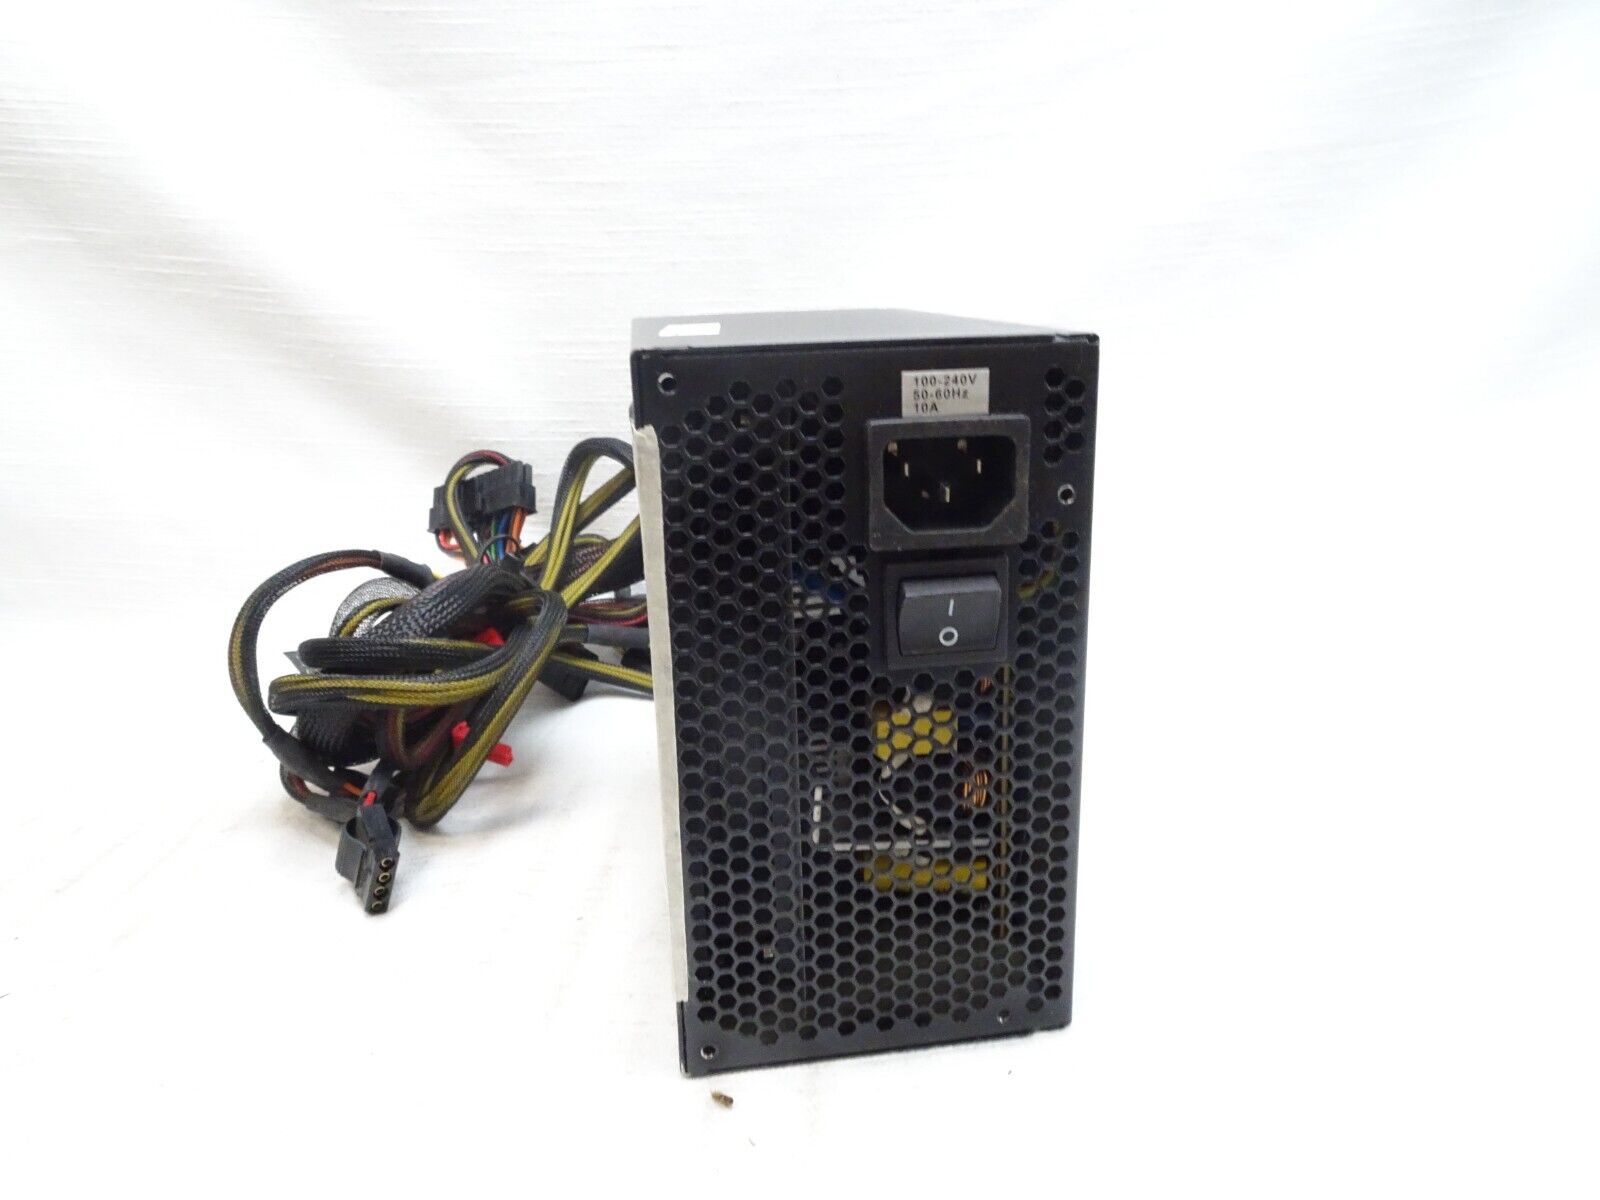 Rosewill Hive-750 Power Supply